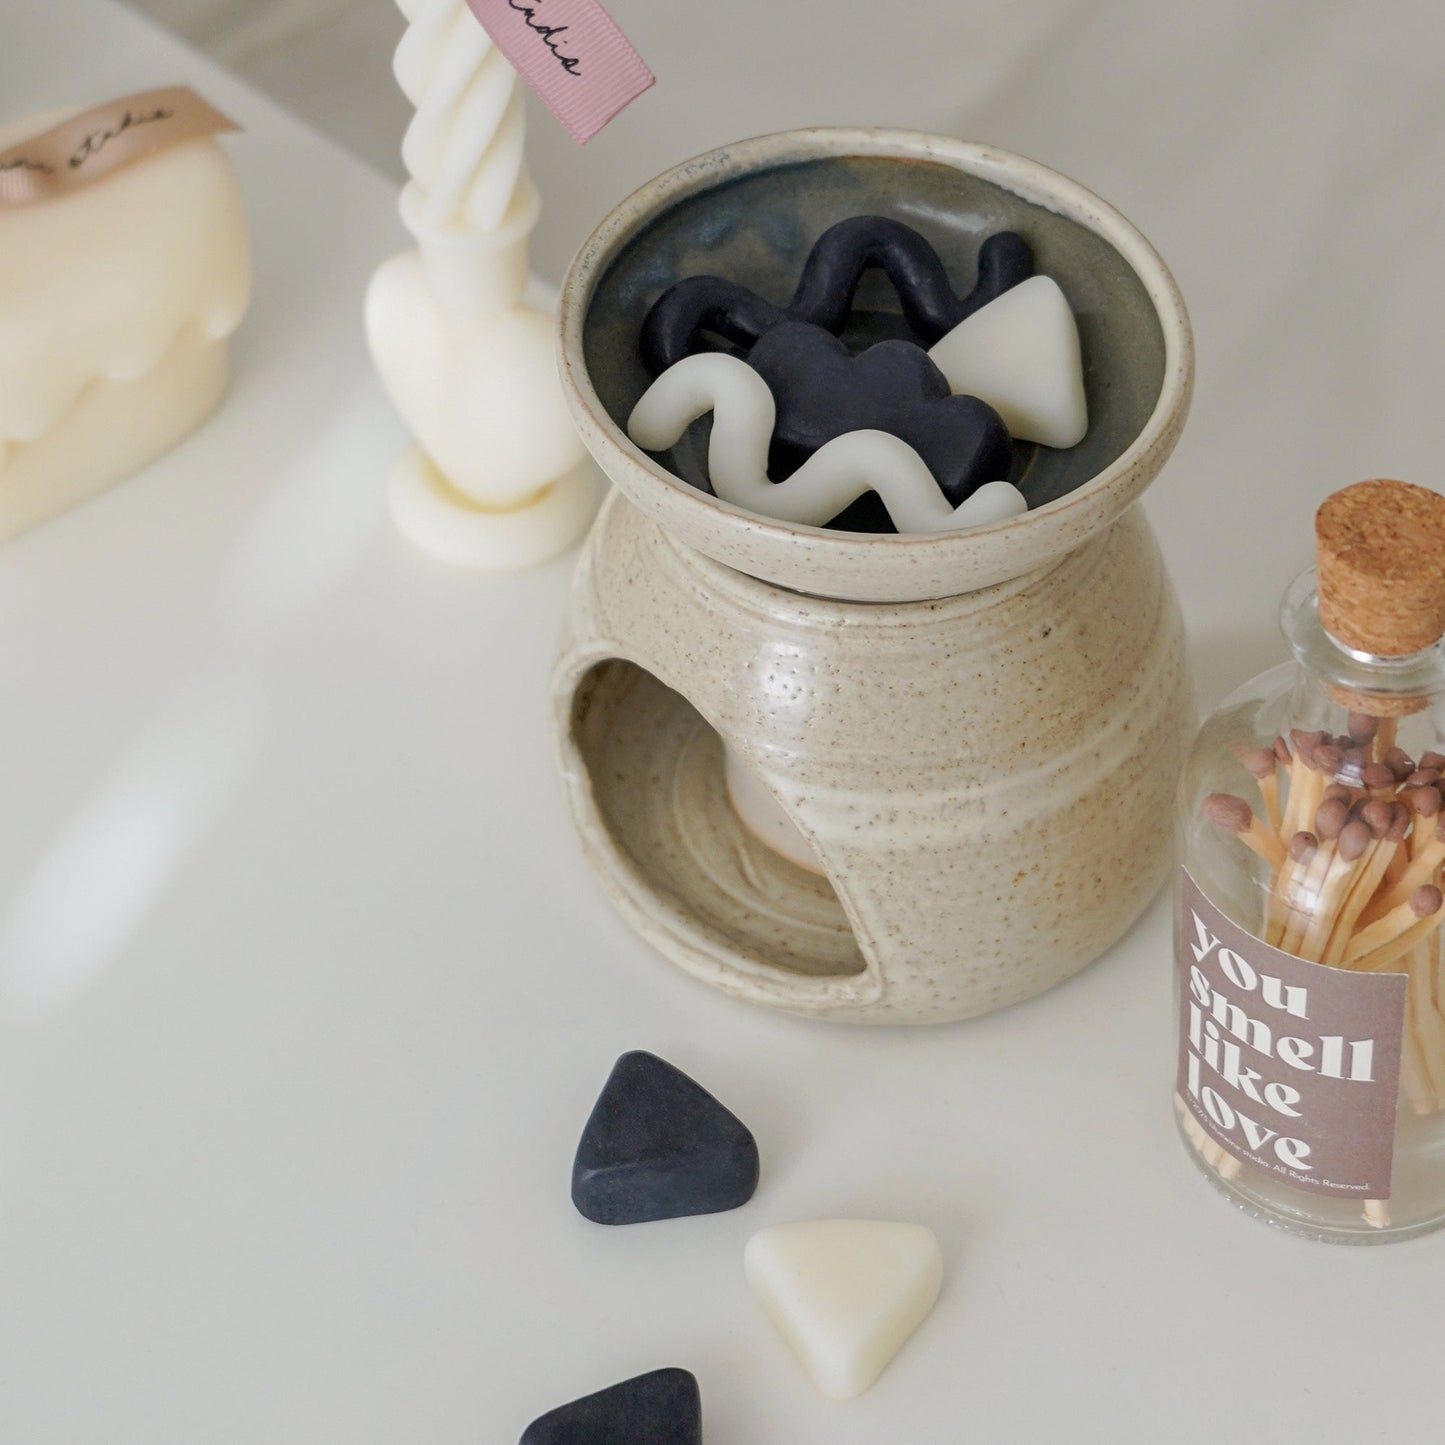 black and white geometric shape unique wax melts in a wax warmer, a match bottle, and a heart twist candle on white table